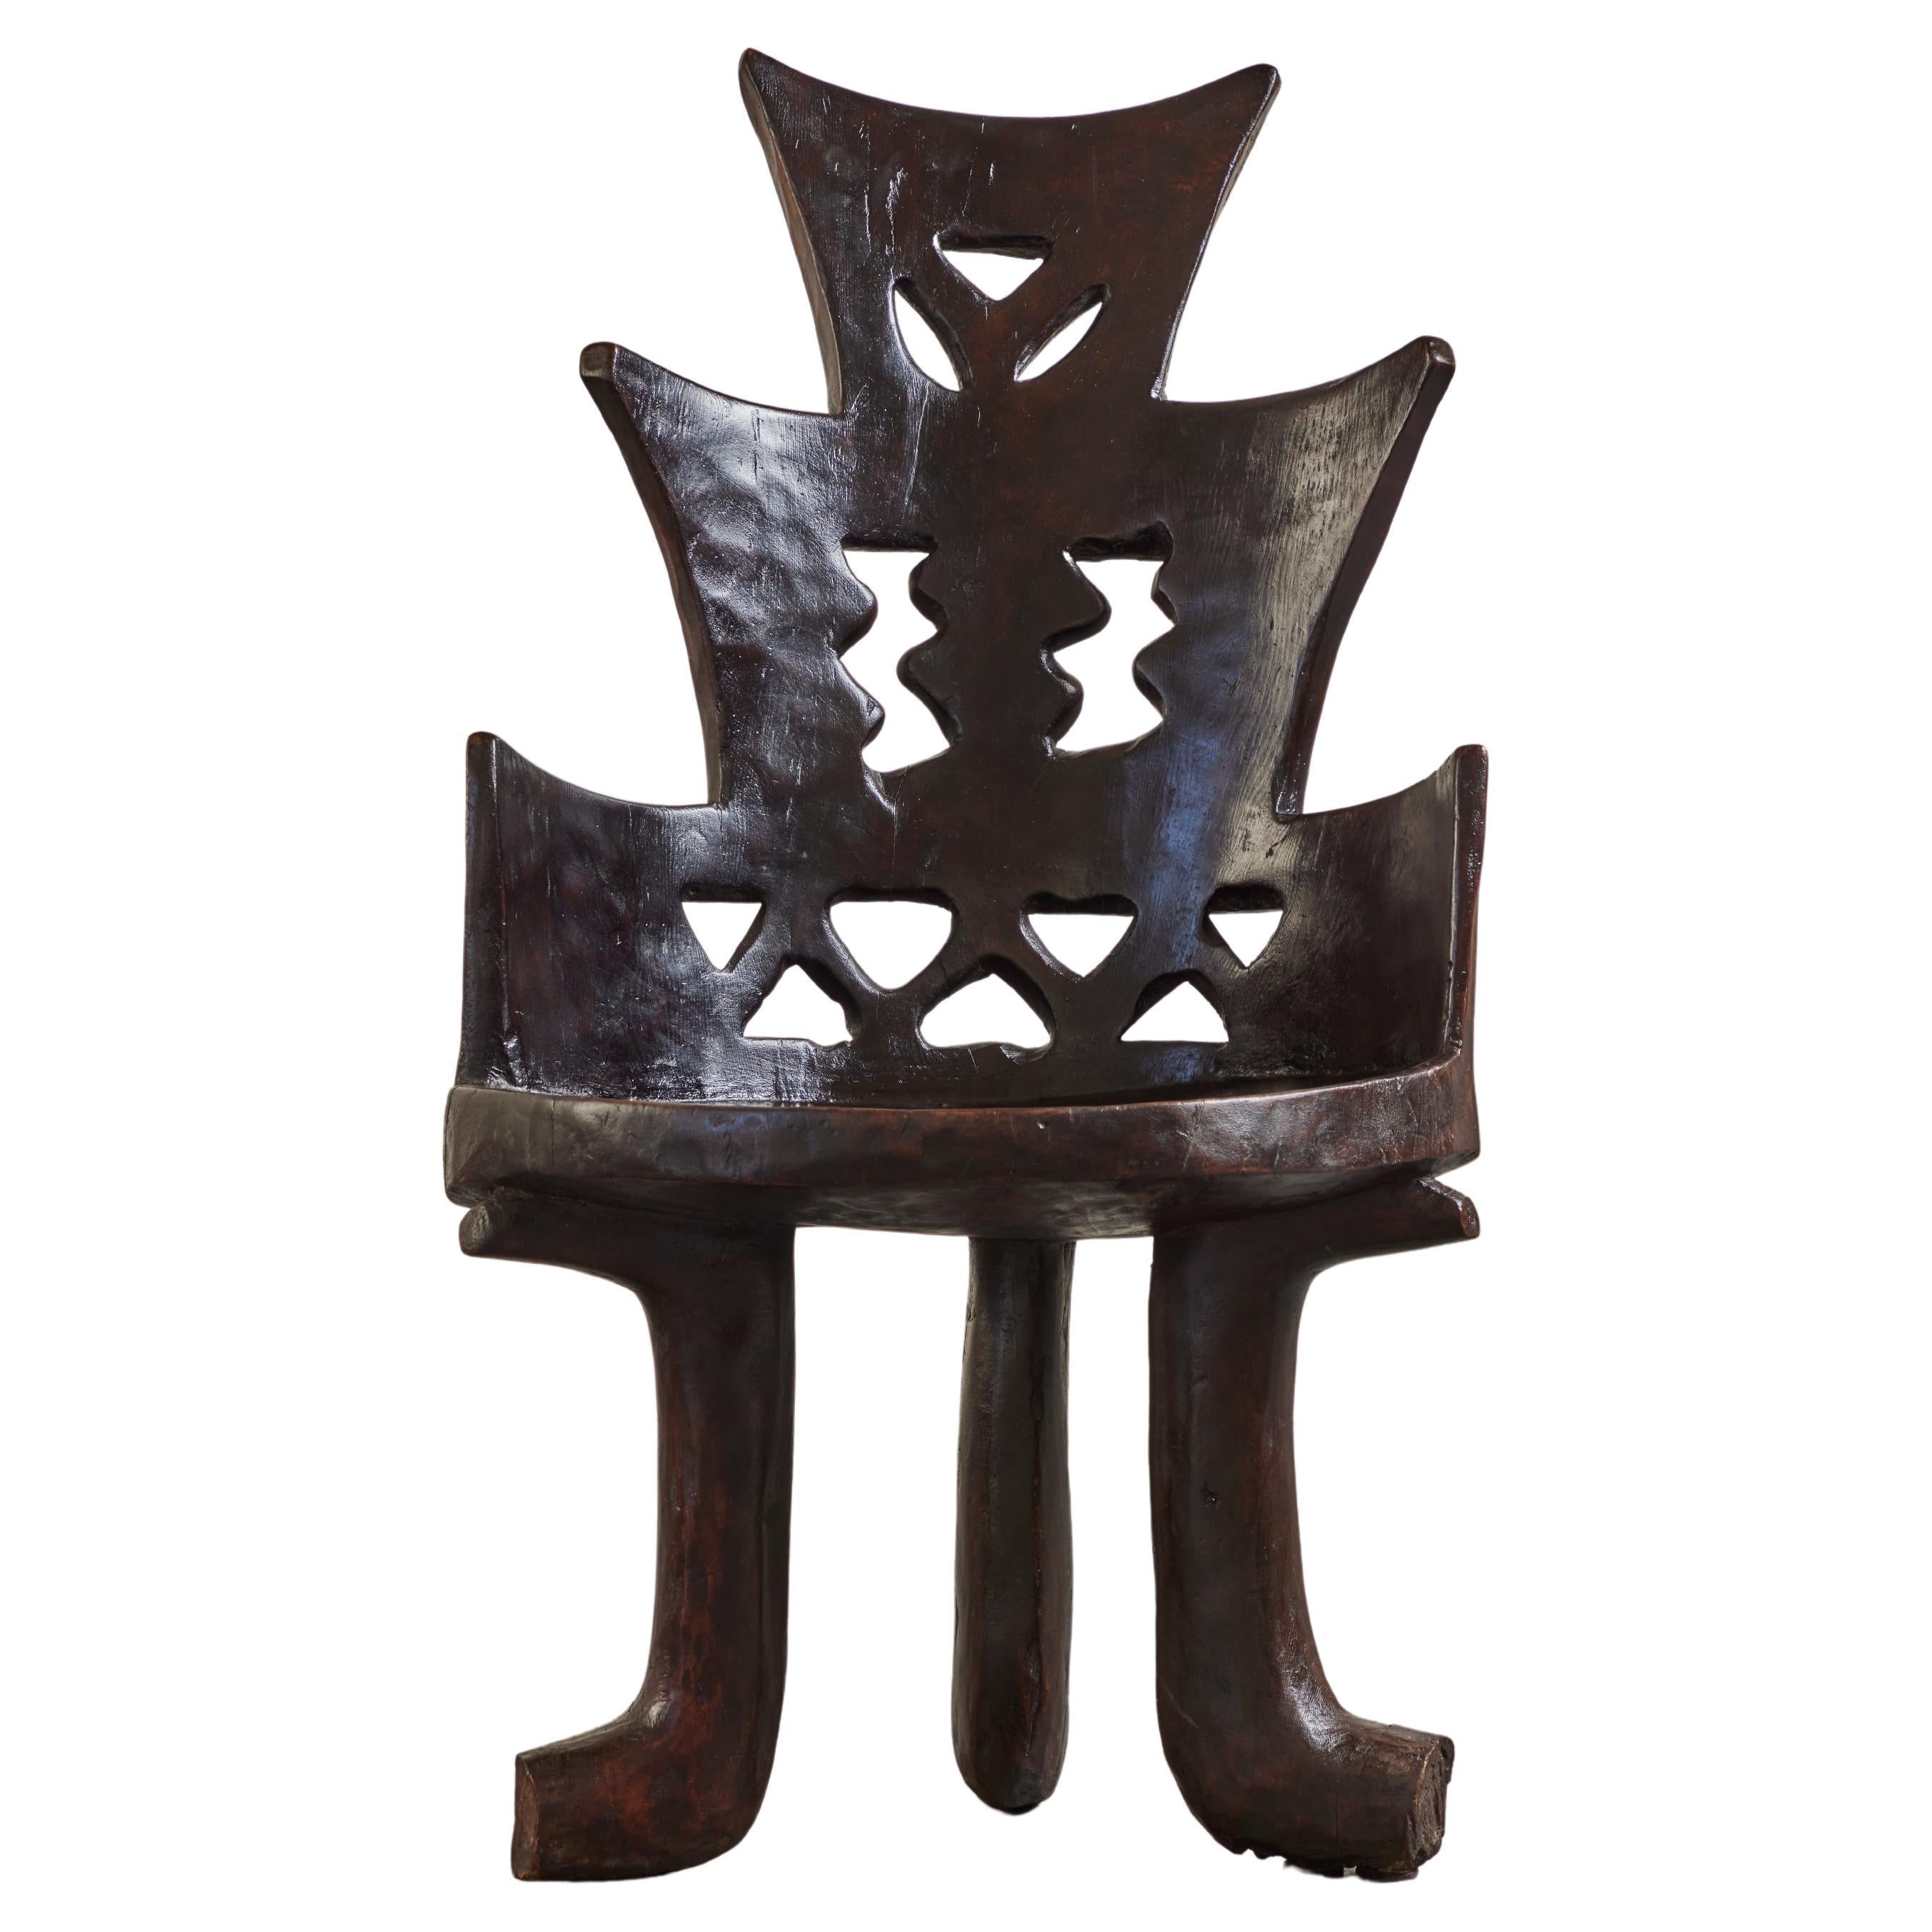 Carved High Back Chair, 20th Century Gurage People, Jimma, Ethiopia